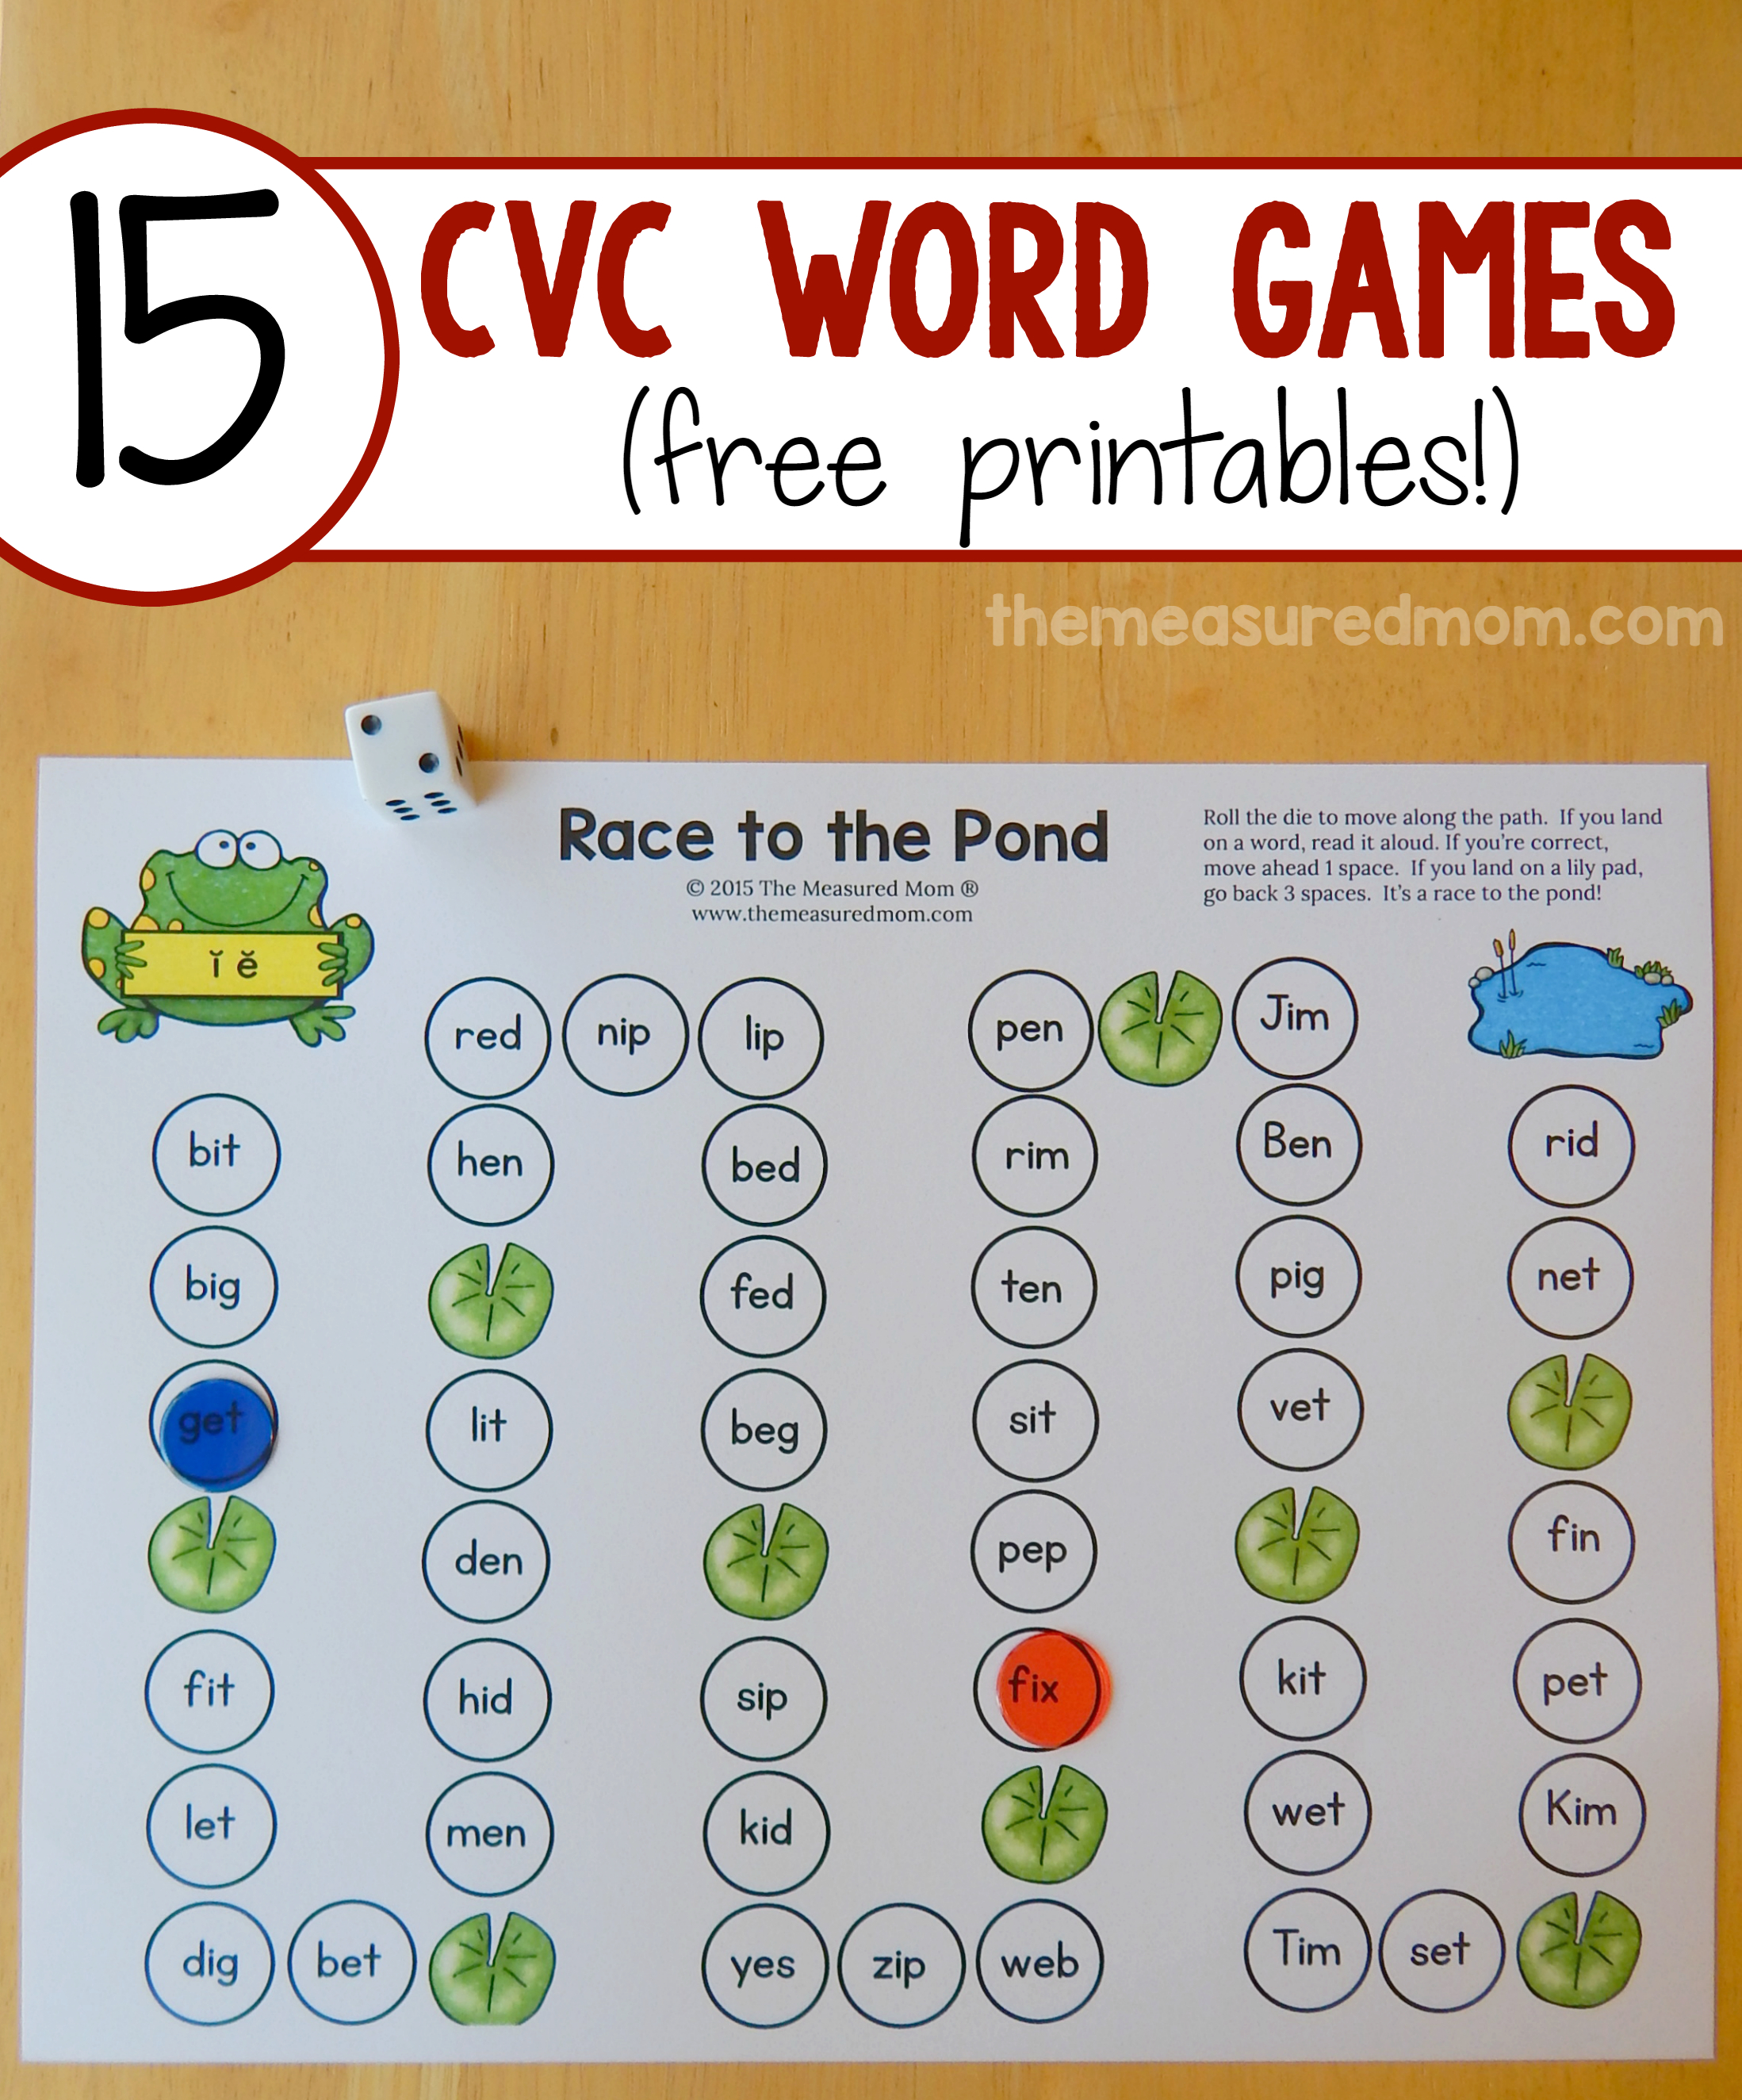 Teach Cvc Words With 15 Free Games! - The Measured Mom - Free Printable Cvc Worksheets